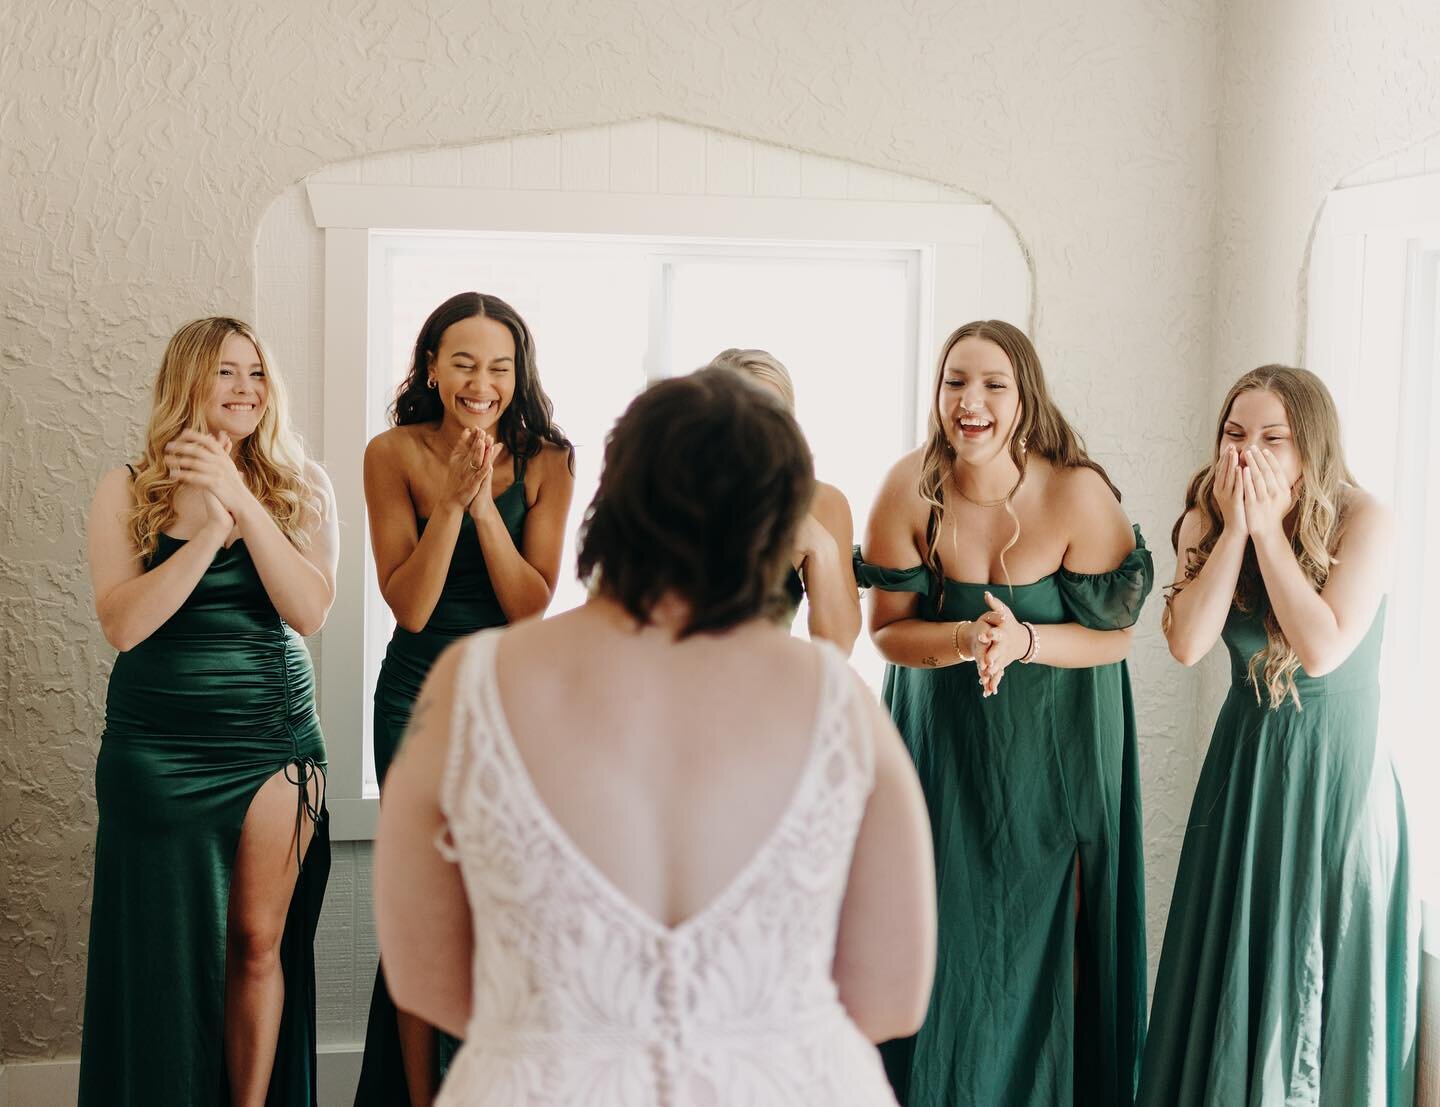 The hype squad literally every bride deserves.